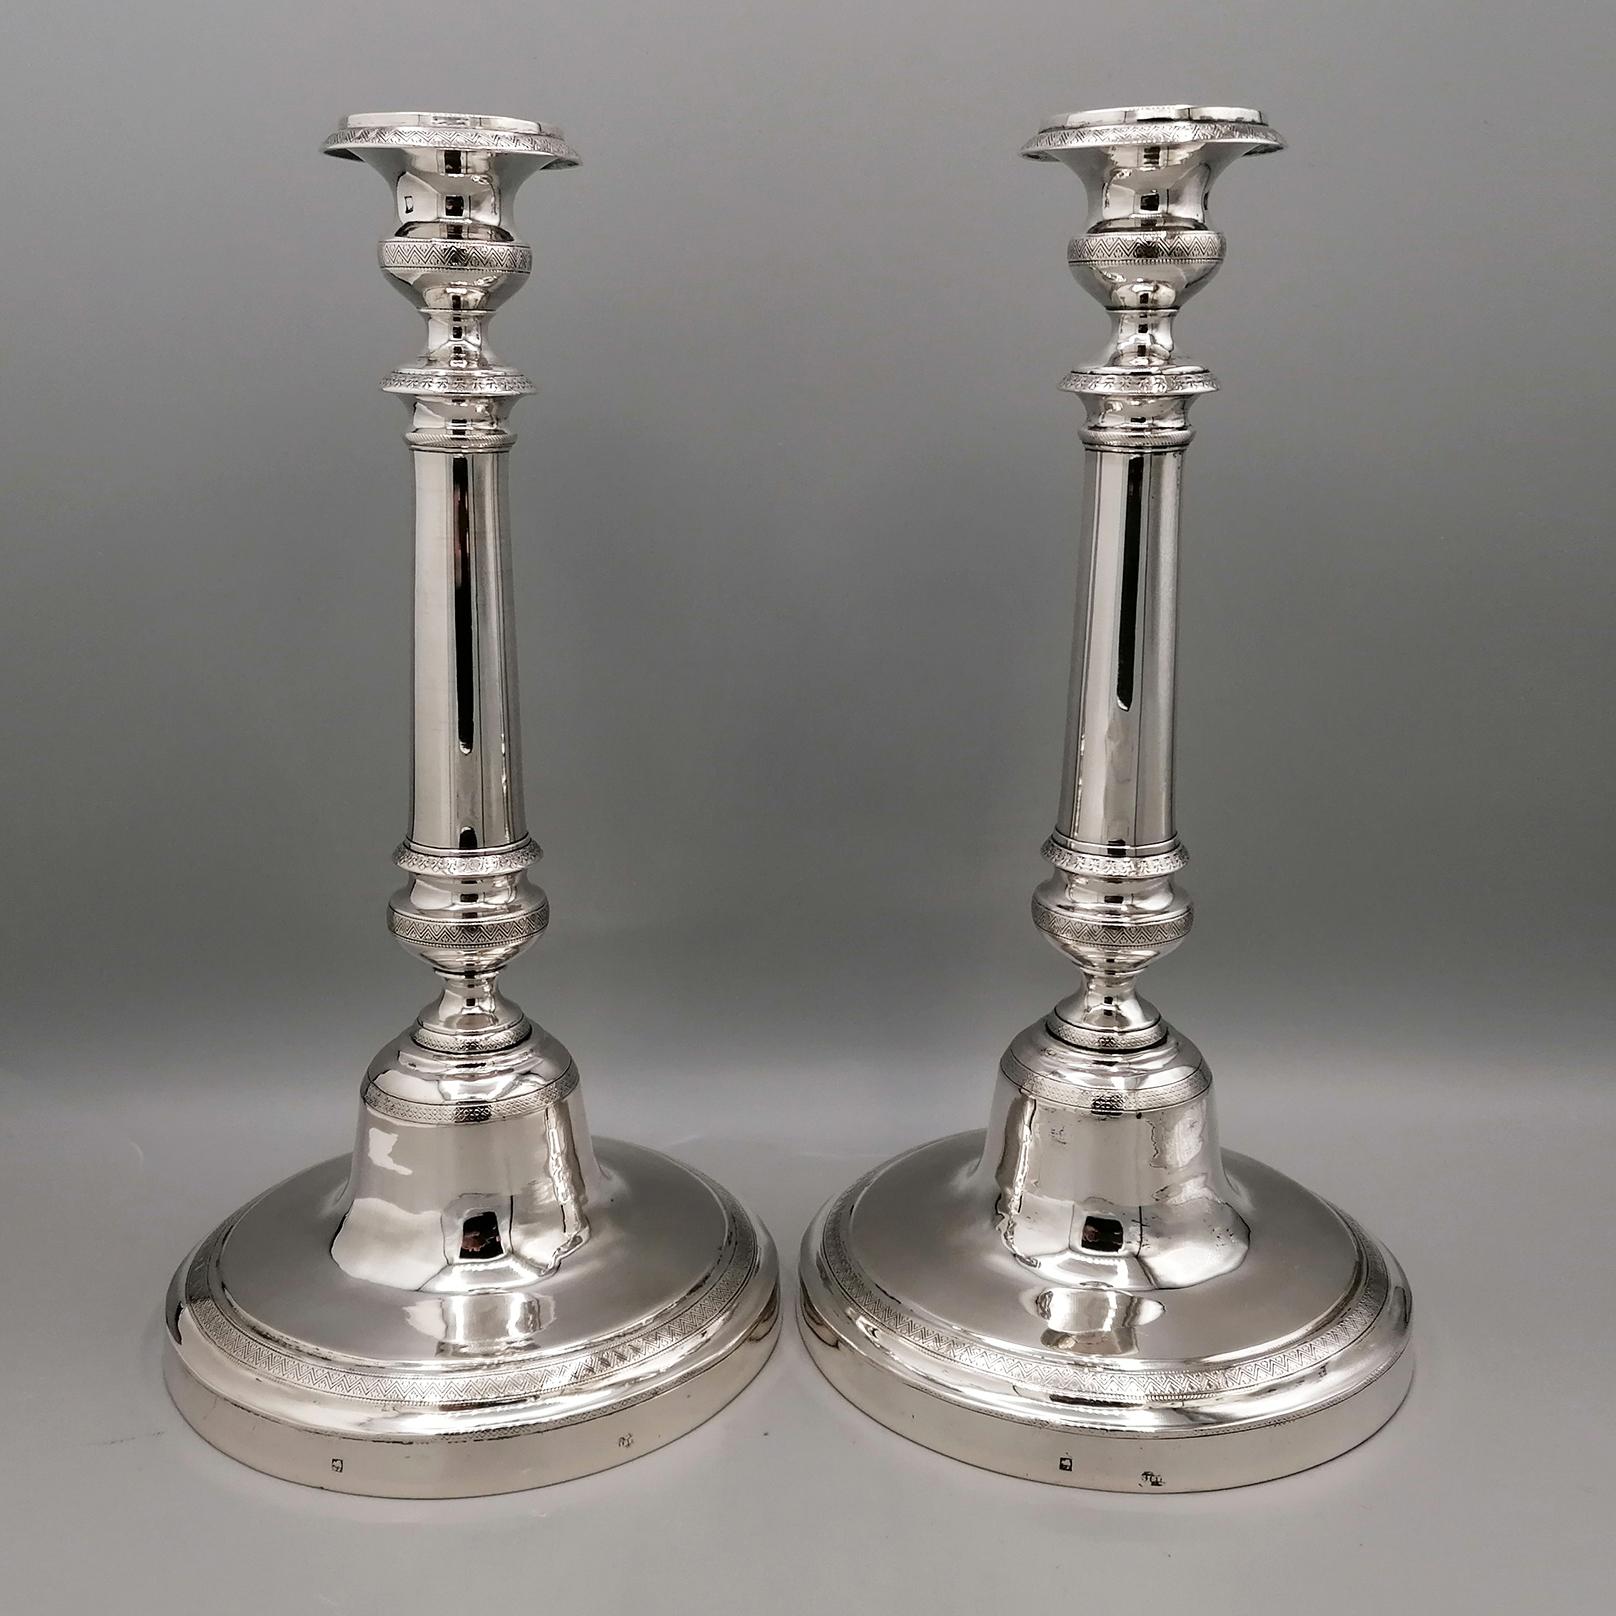 Pair of Italian silver candlesticks - Naples, c. 1840 For Sale 9